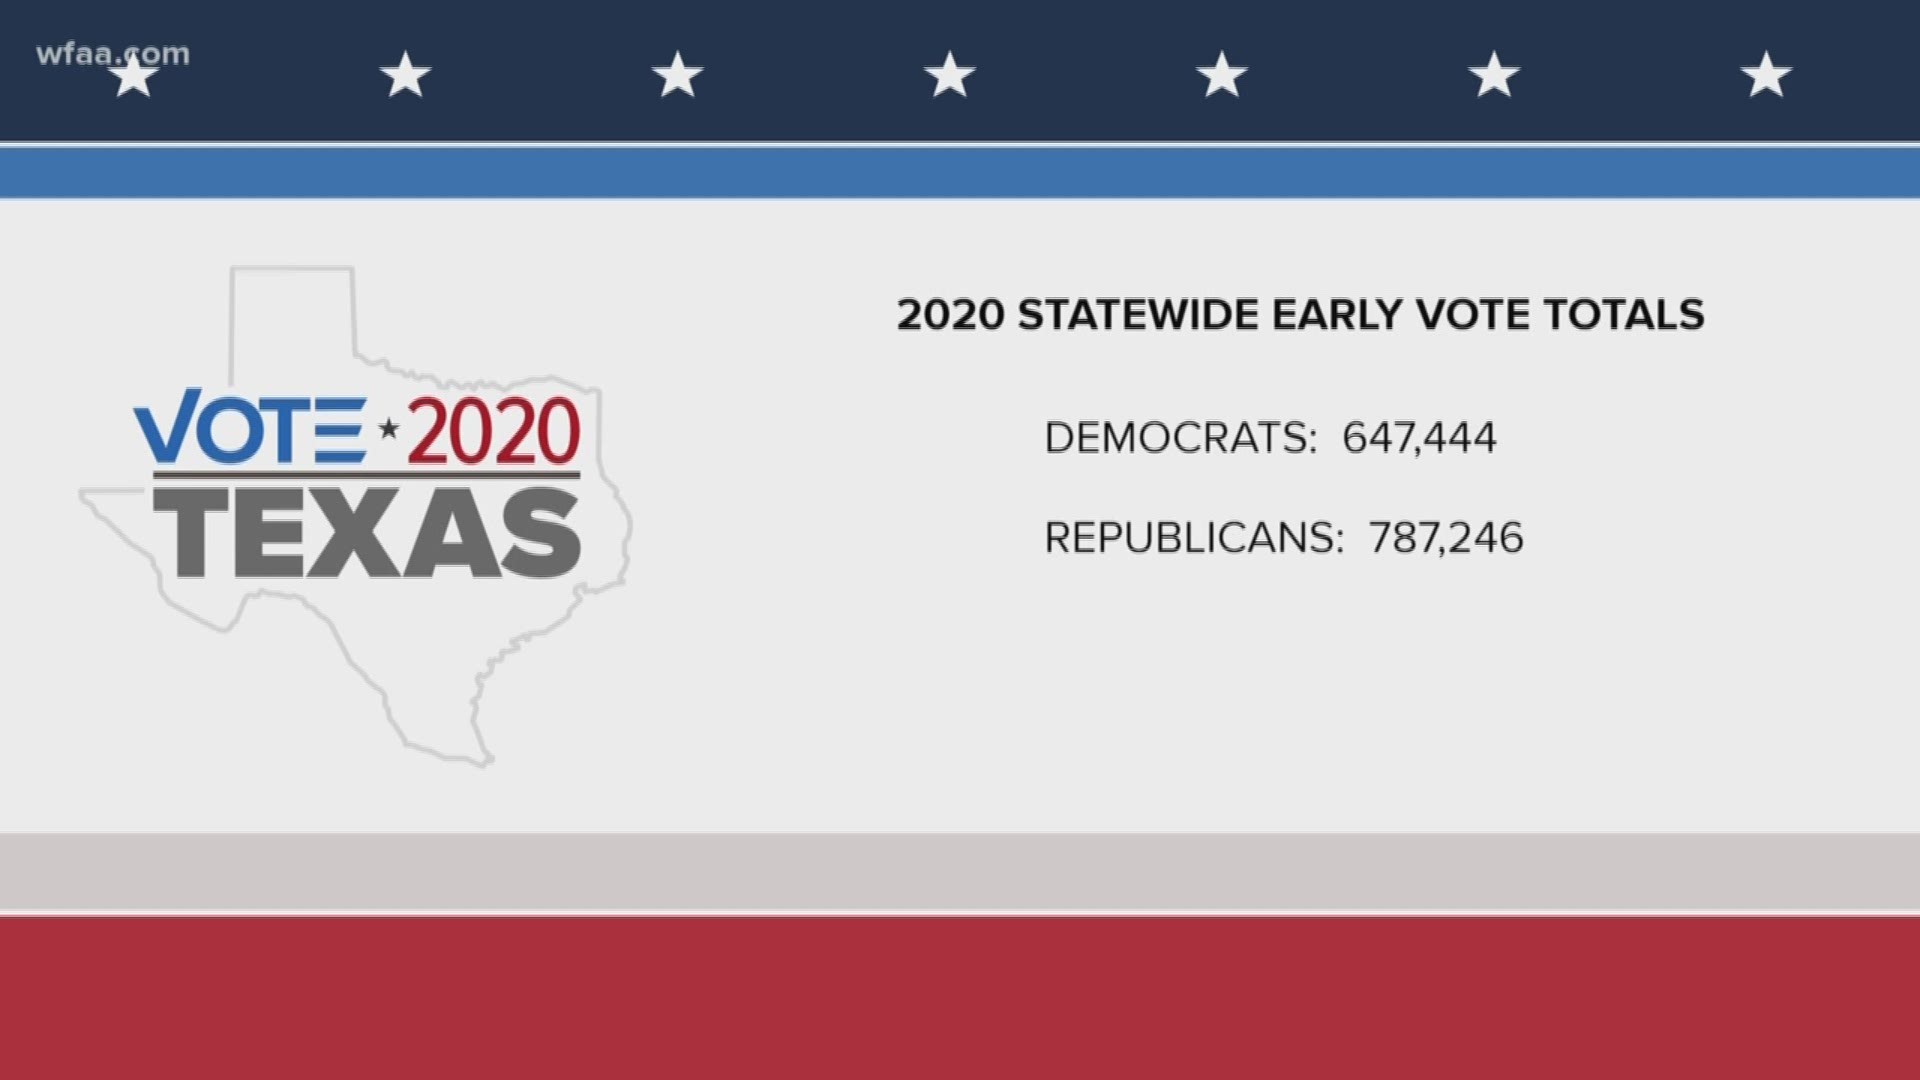 Many people are looking closely at Tarrant County in 2020 because of what happened there in 2018, when Beto O’Rourke narrowly defeated Sen. Ted Cruz.